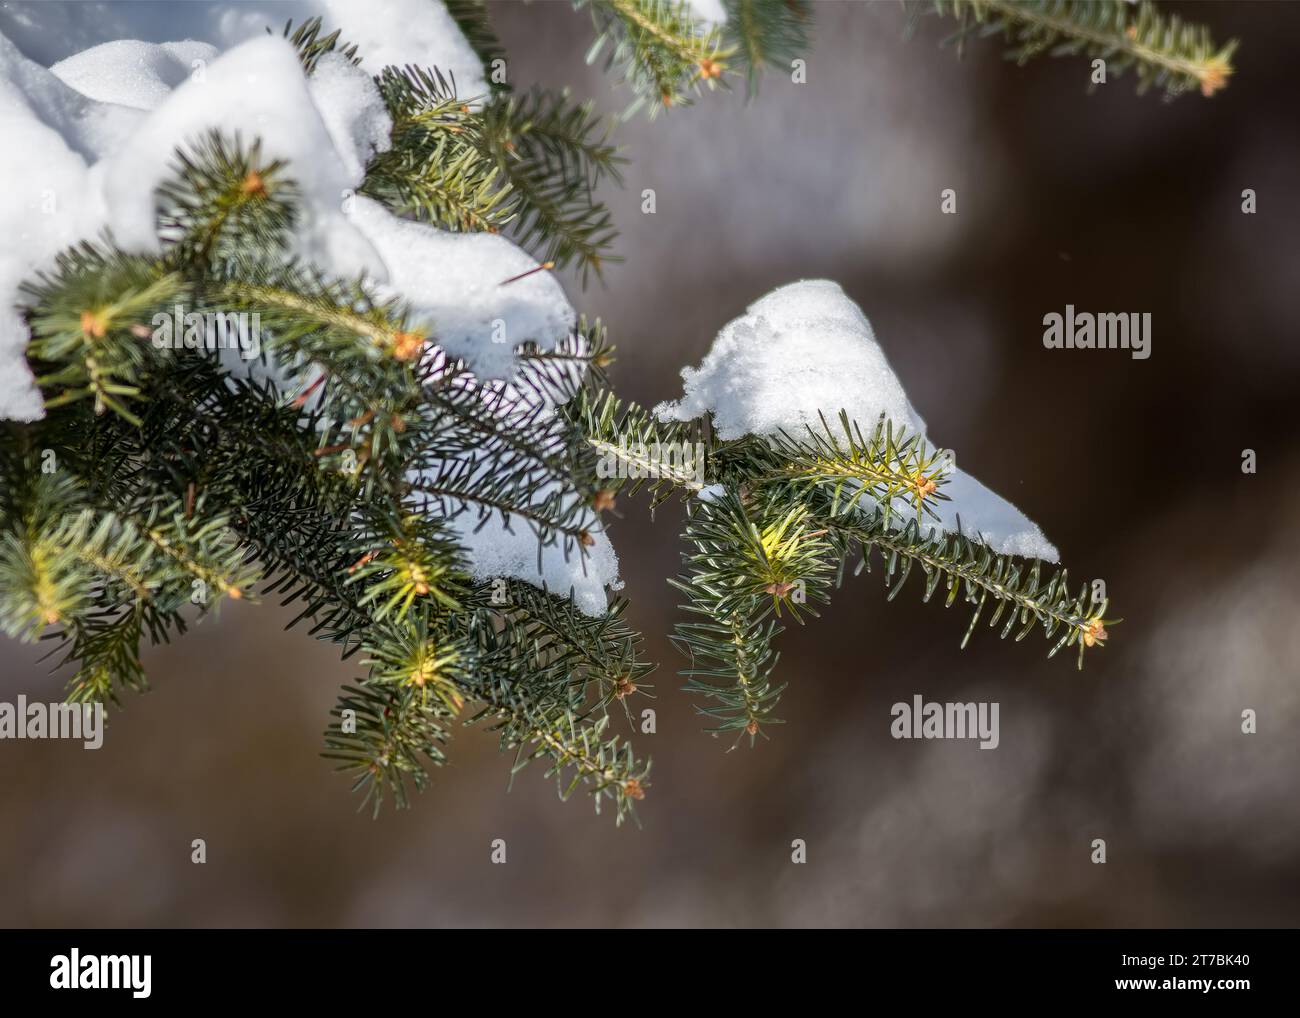 Close up of a White Spruce (Picea glauca) snow covered bough growing in the Chippewa National Forest, northern Minnesota USA Stock Photo